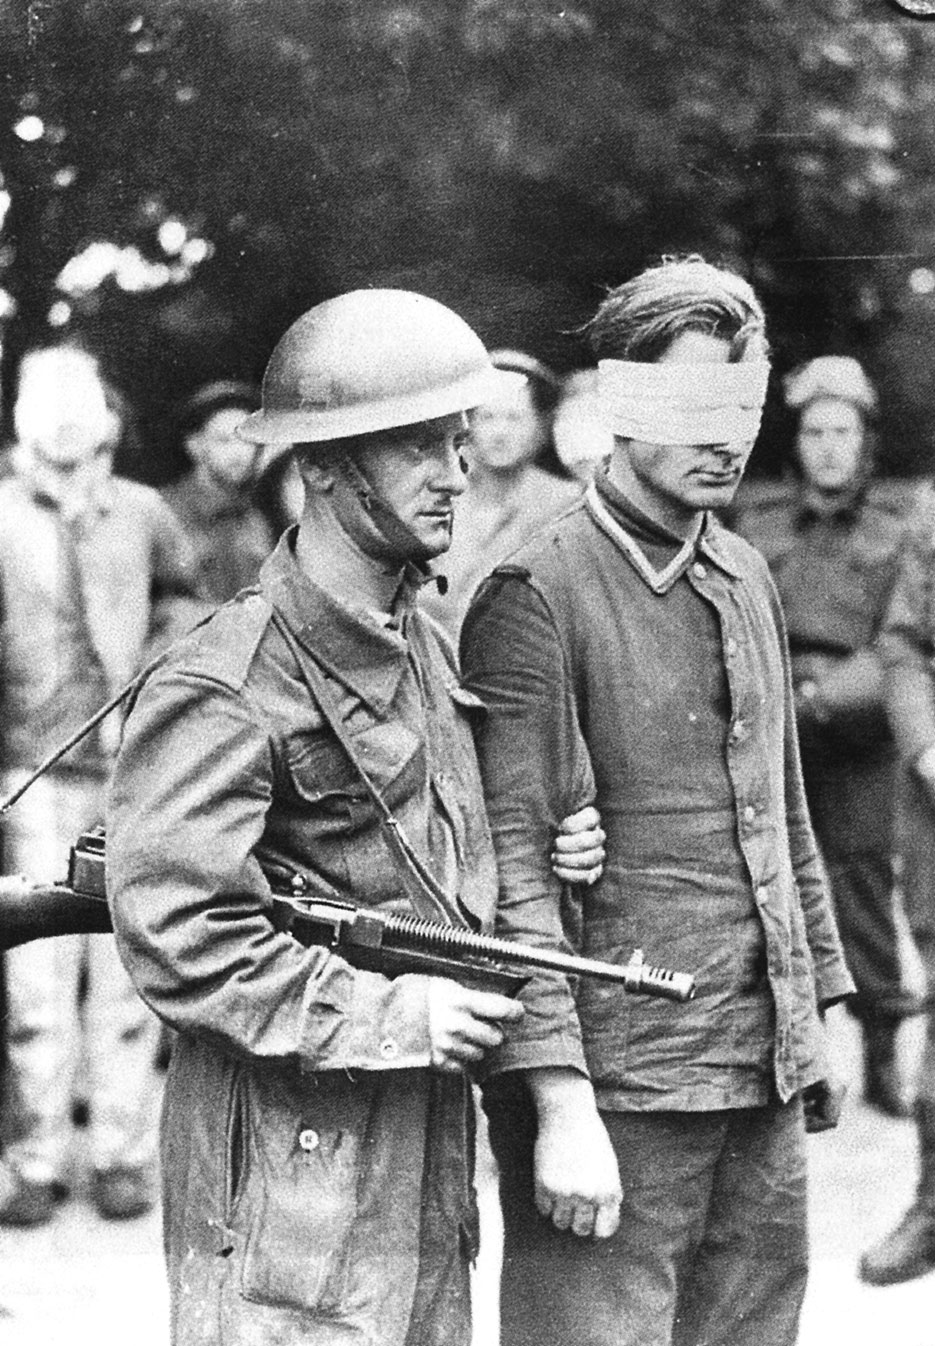 Canadian soldier armed with Thompson submachine gun guides German prisoner captured during Operation Jubilee (Library and Archives Canada)